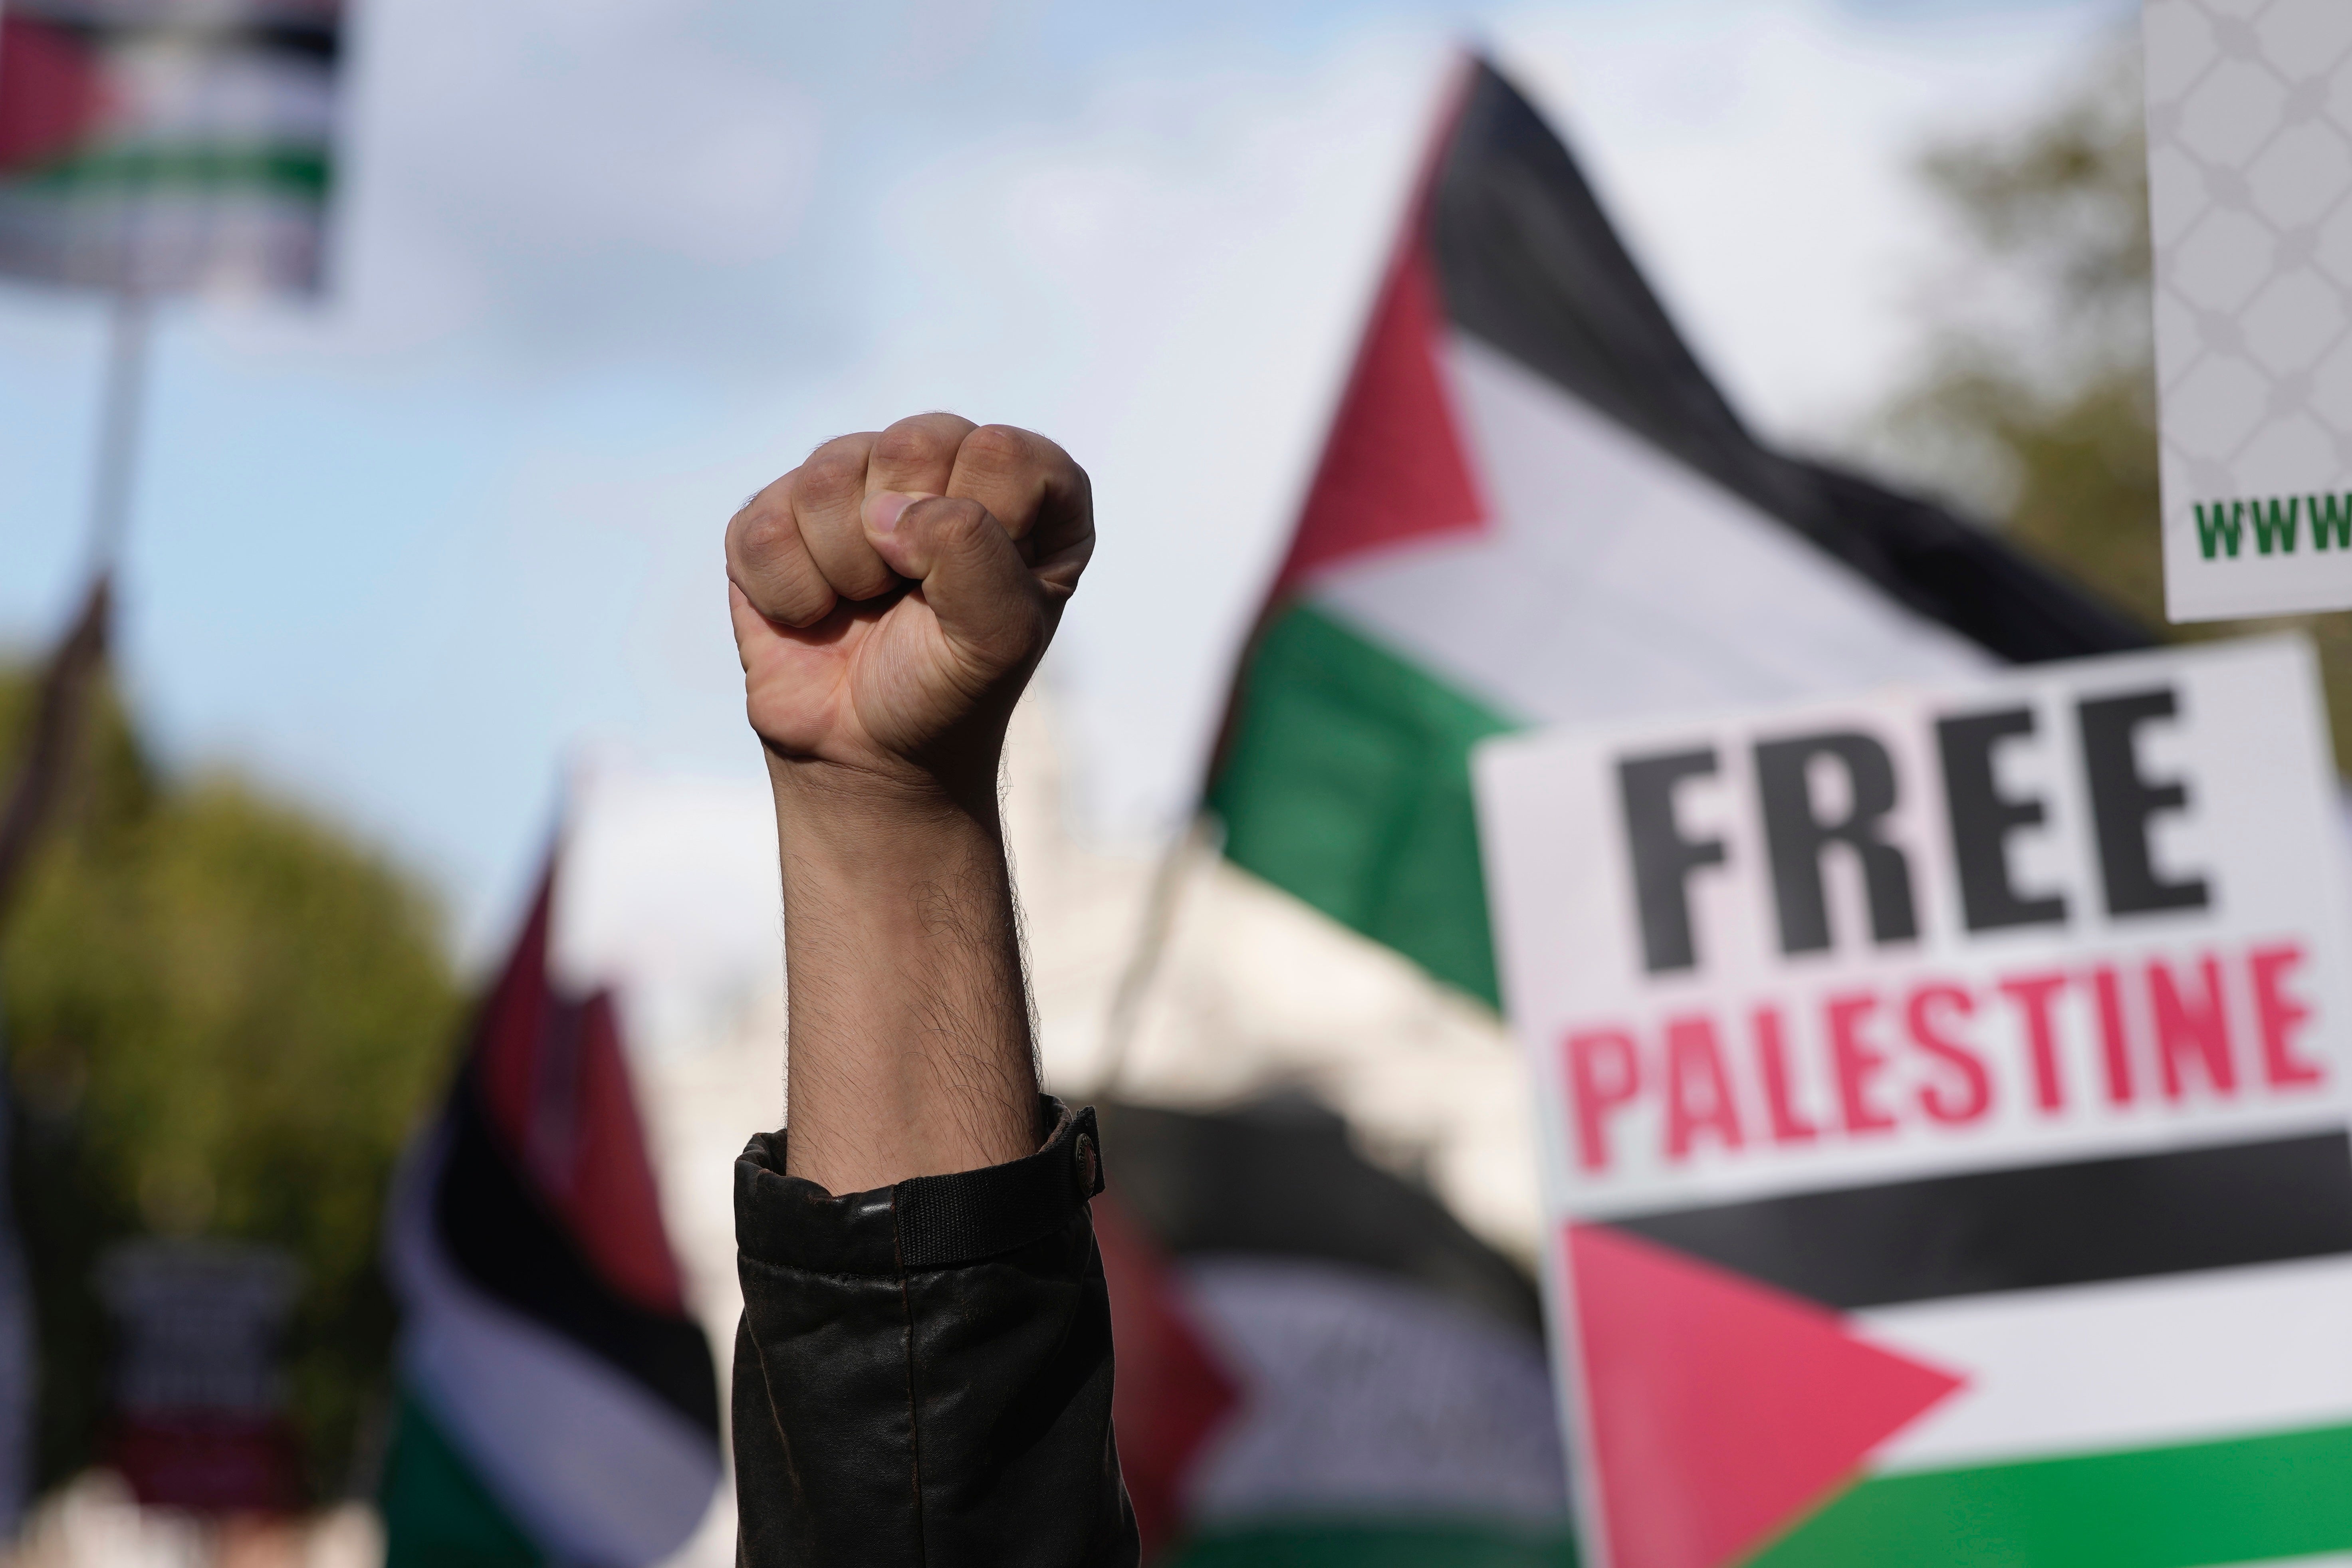 Large crowds turned out to support the Palestinian people across the UK